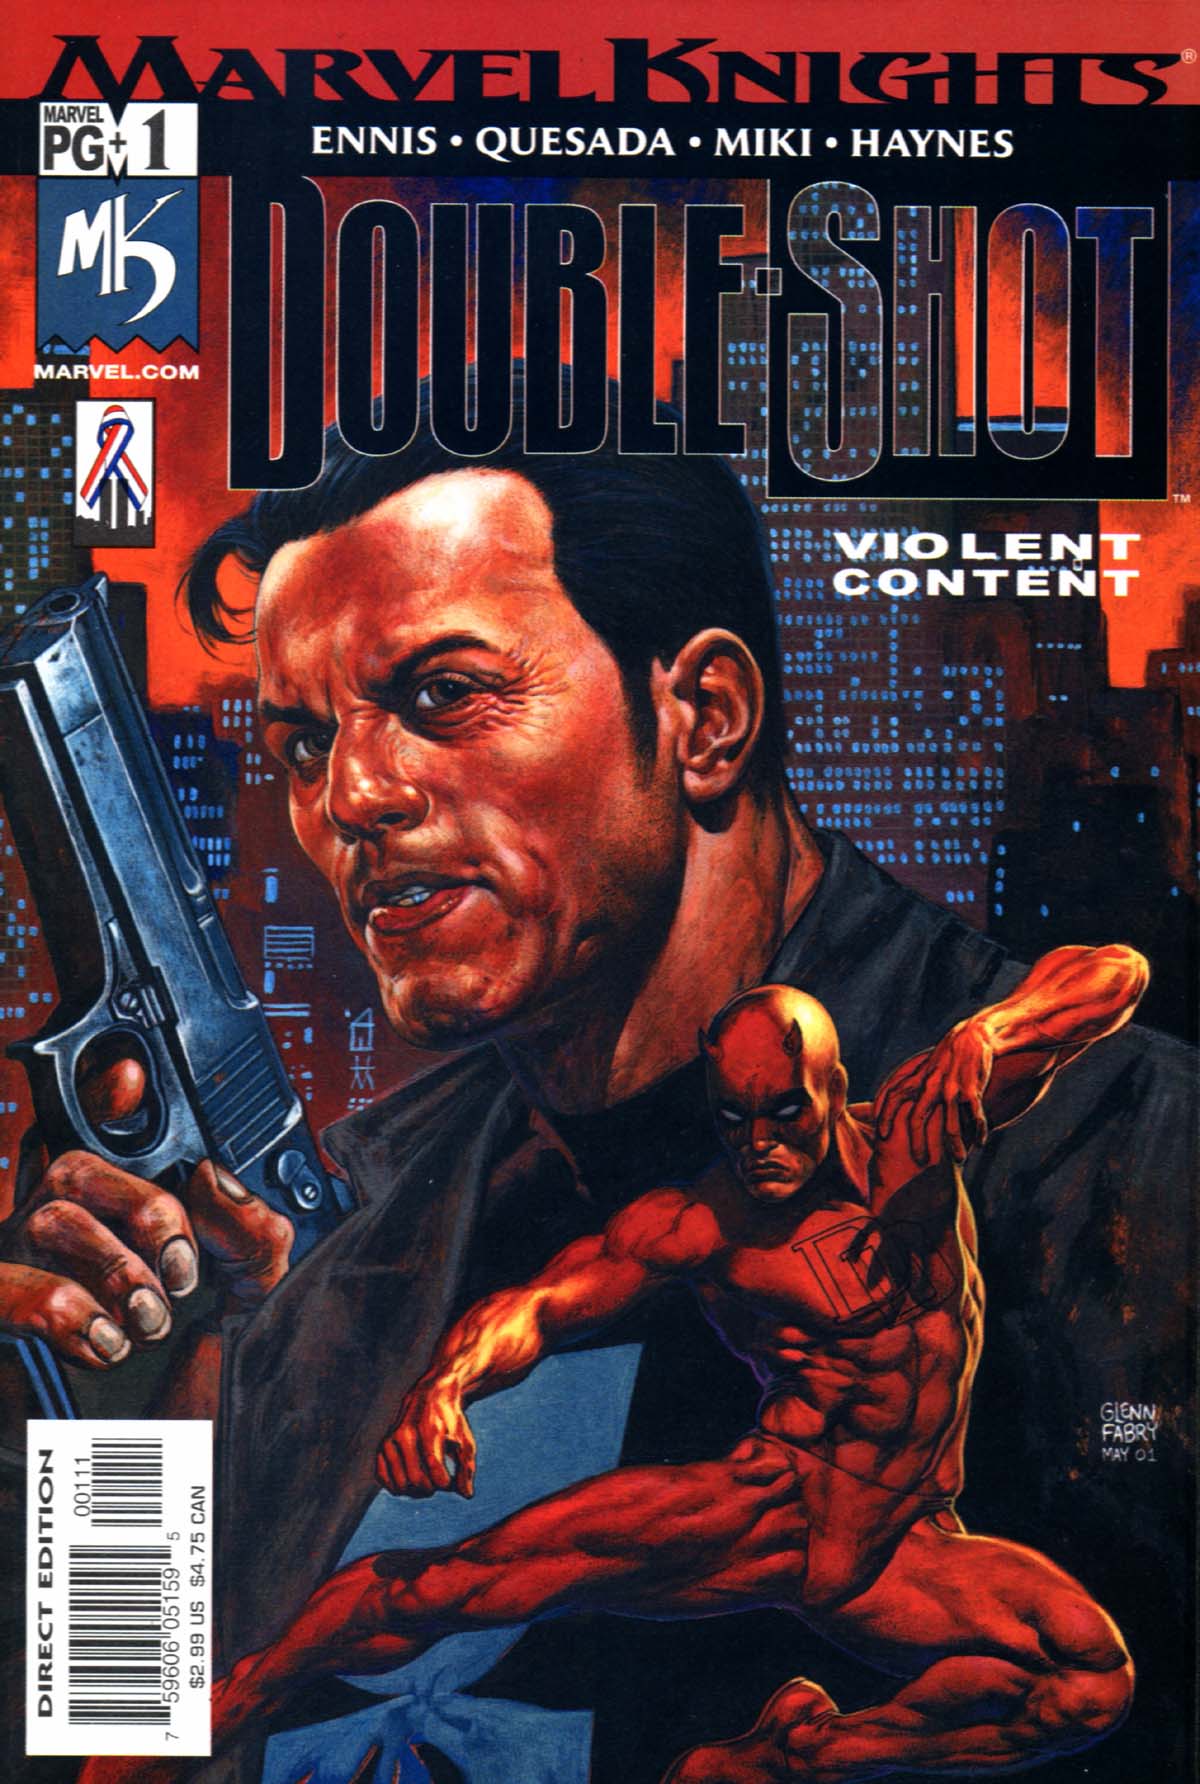 Read online Marvel Knights Double Shot comic -  Issue #1 - 1